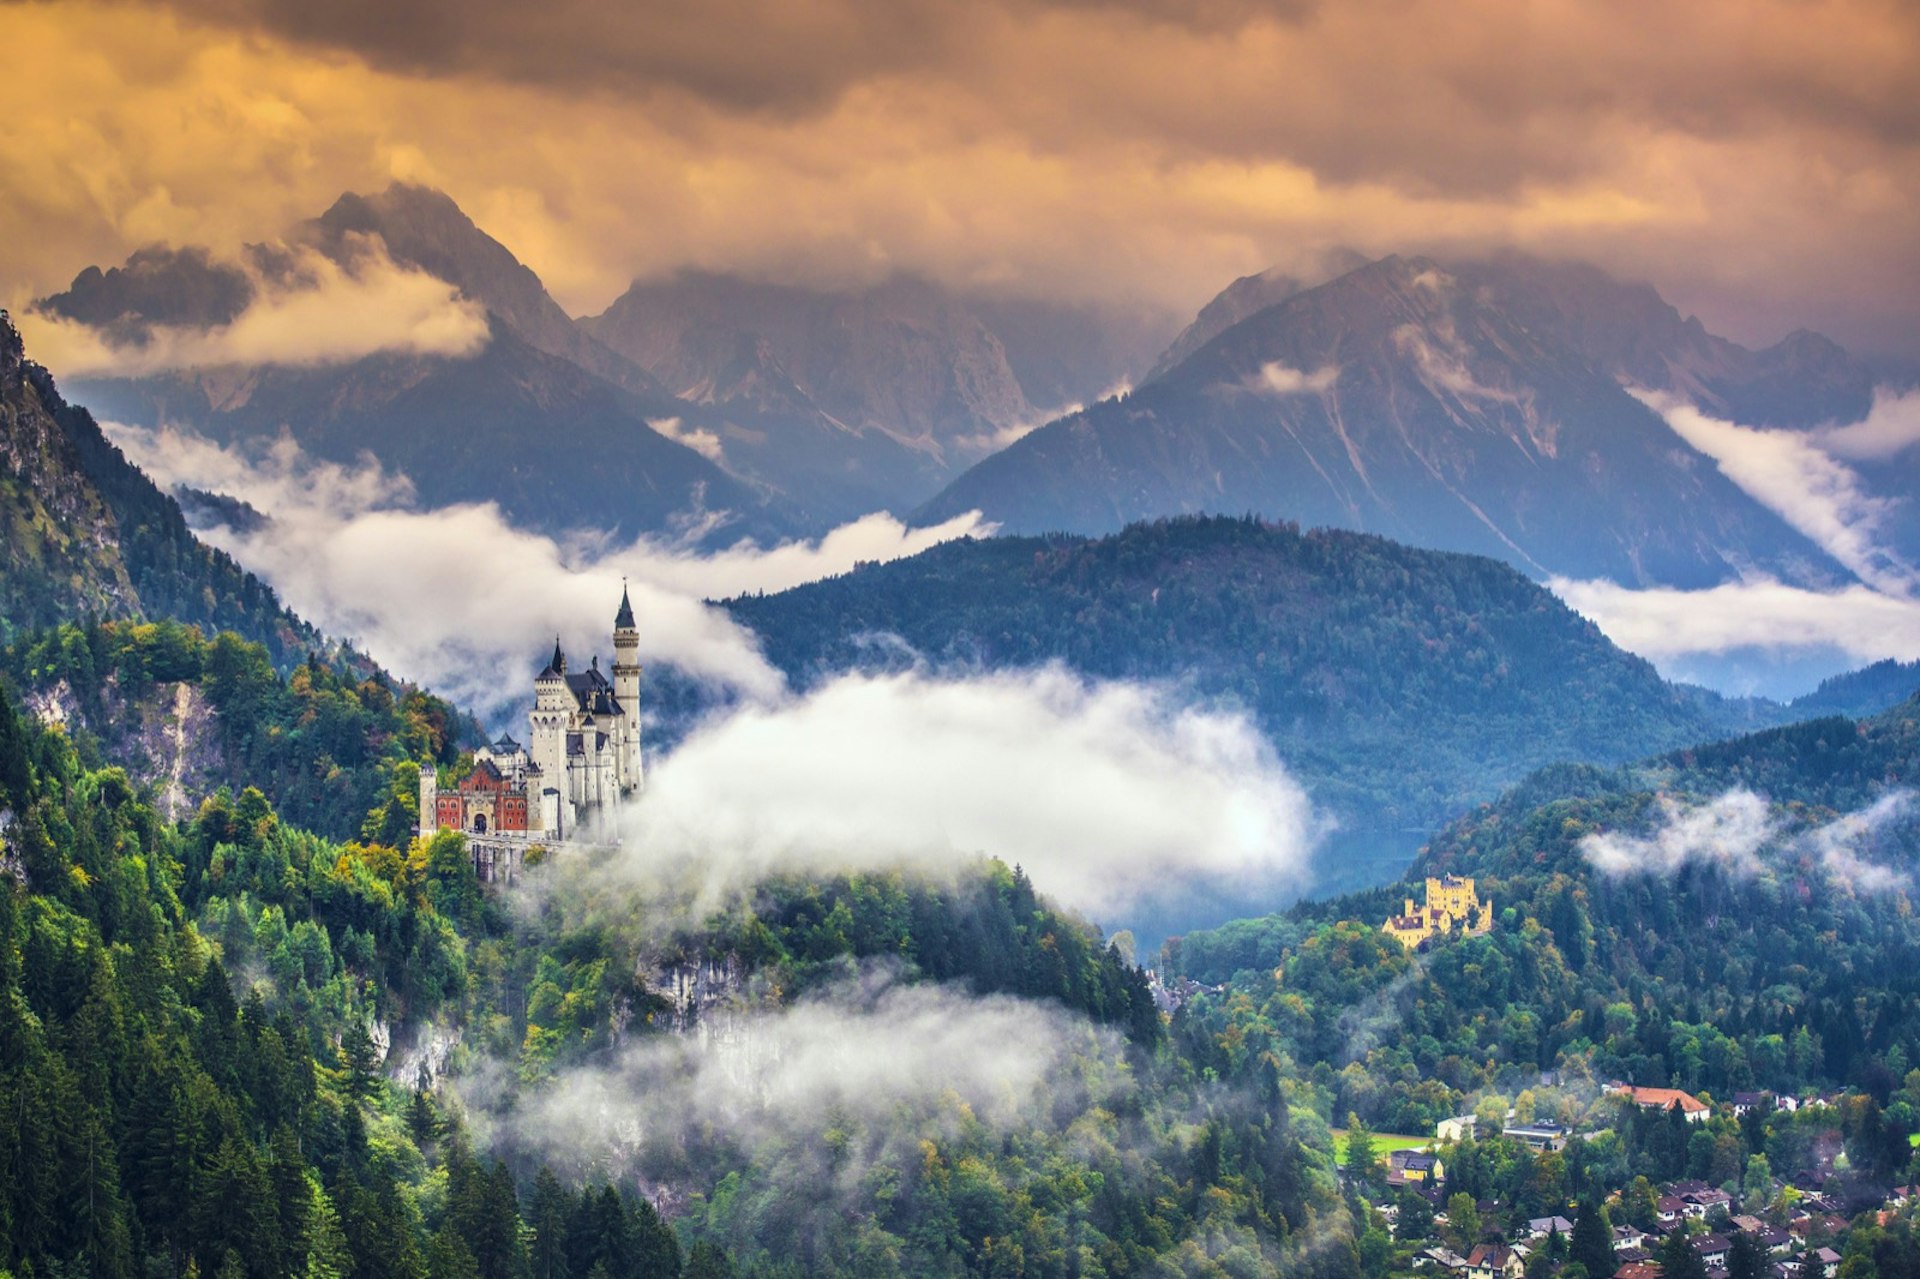 Neschwanstein Castle in the Bavarian Alps of Germany pokes through some clouds as the village is seen far below; Germany for first-timers